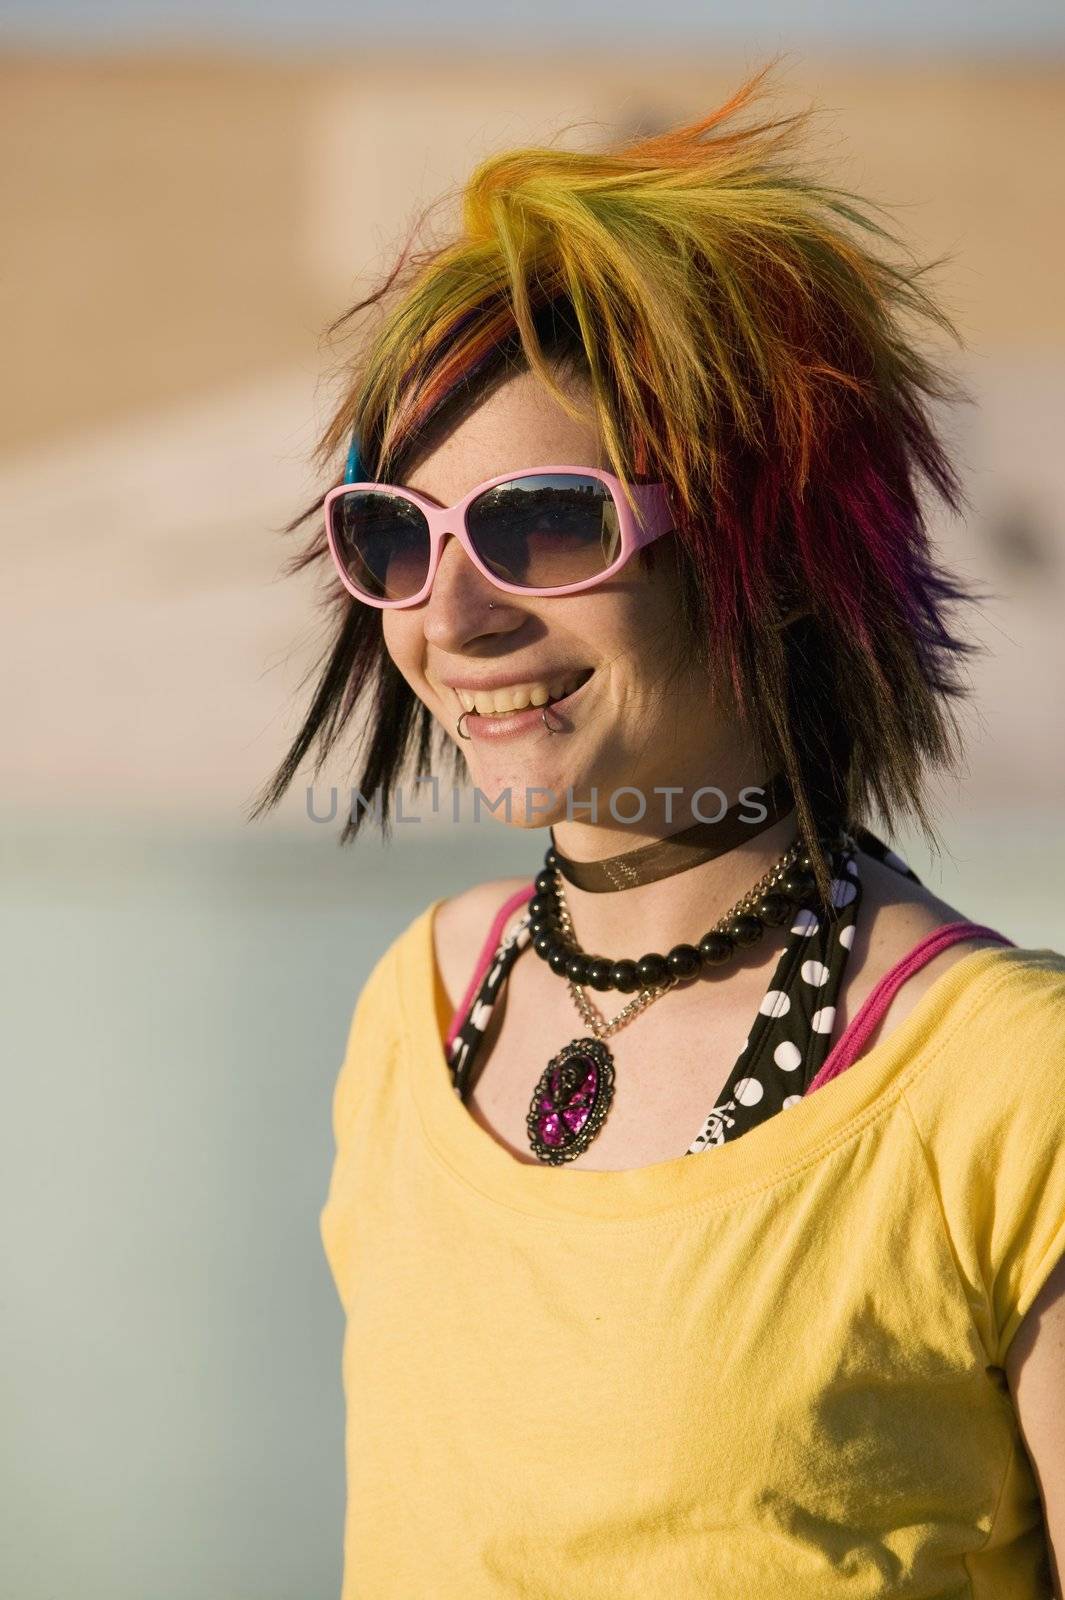 Portrait of a Smiling Punk Girl with Bright Colorful and Big Sunglasses Outdoors at Sundown